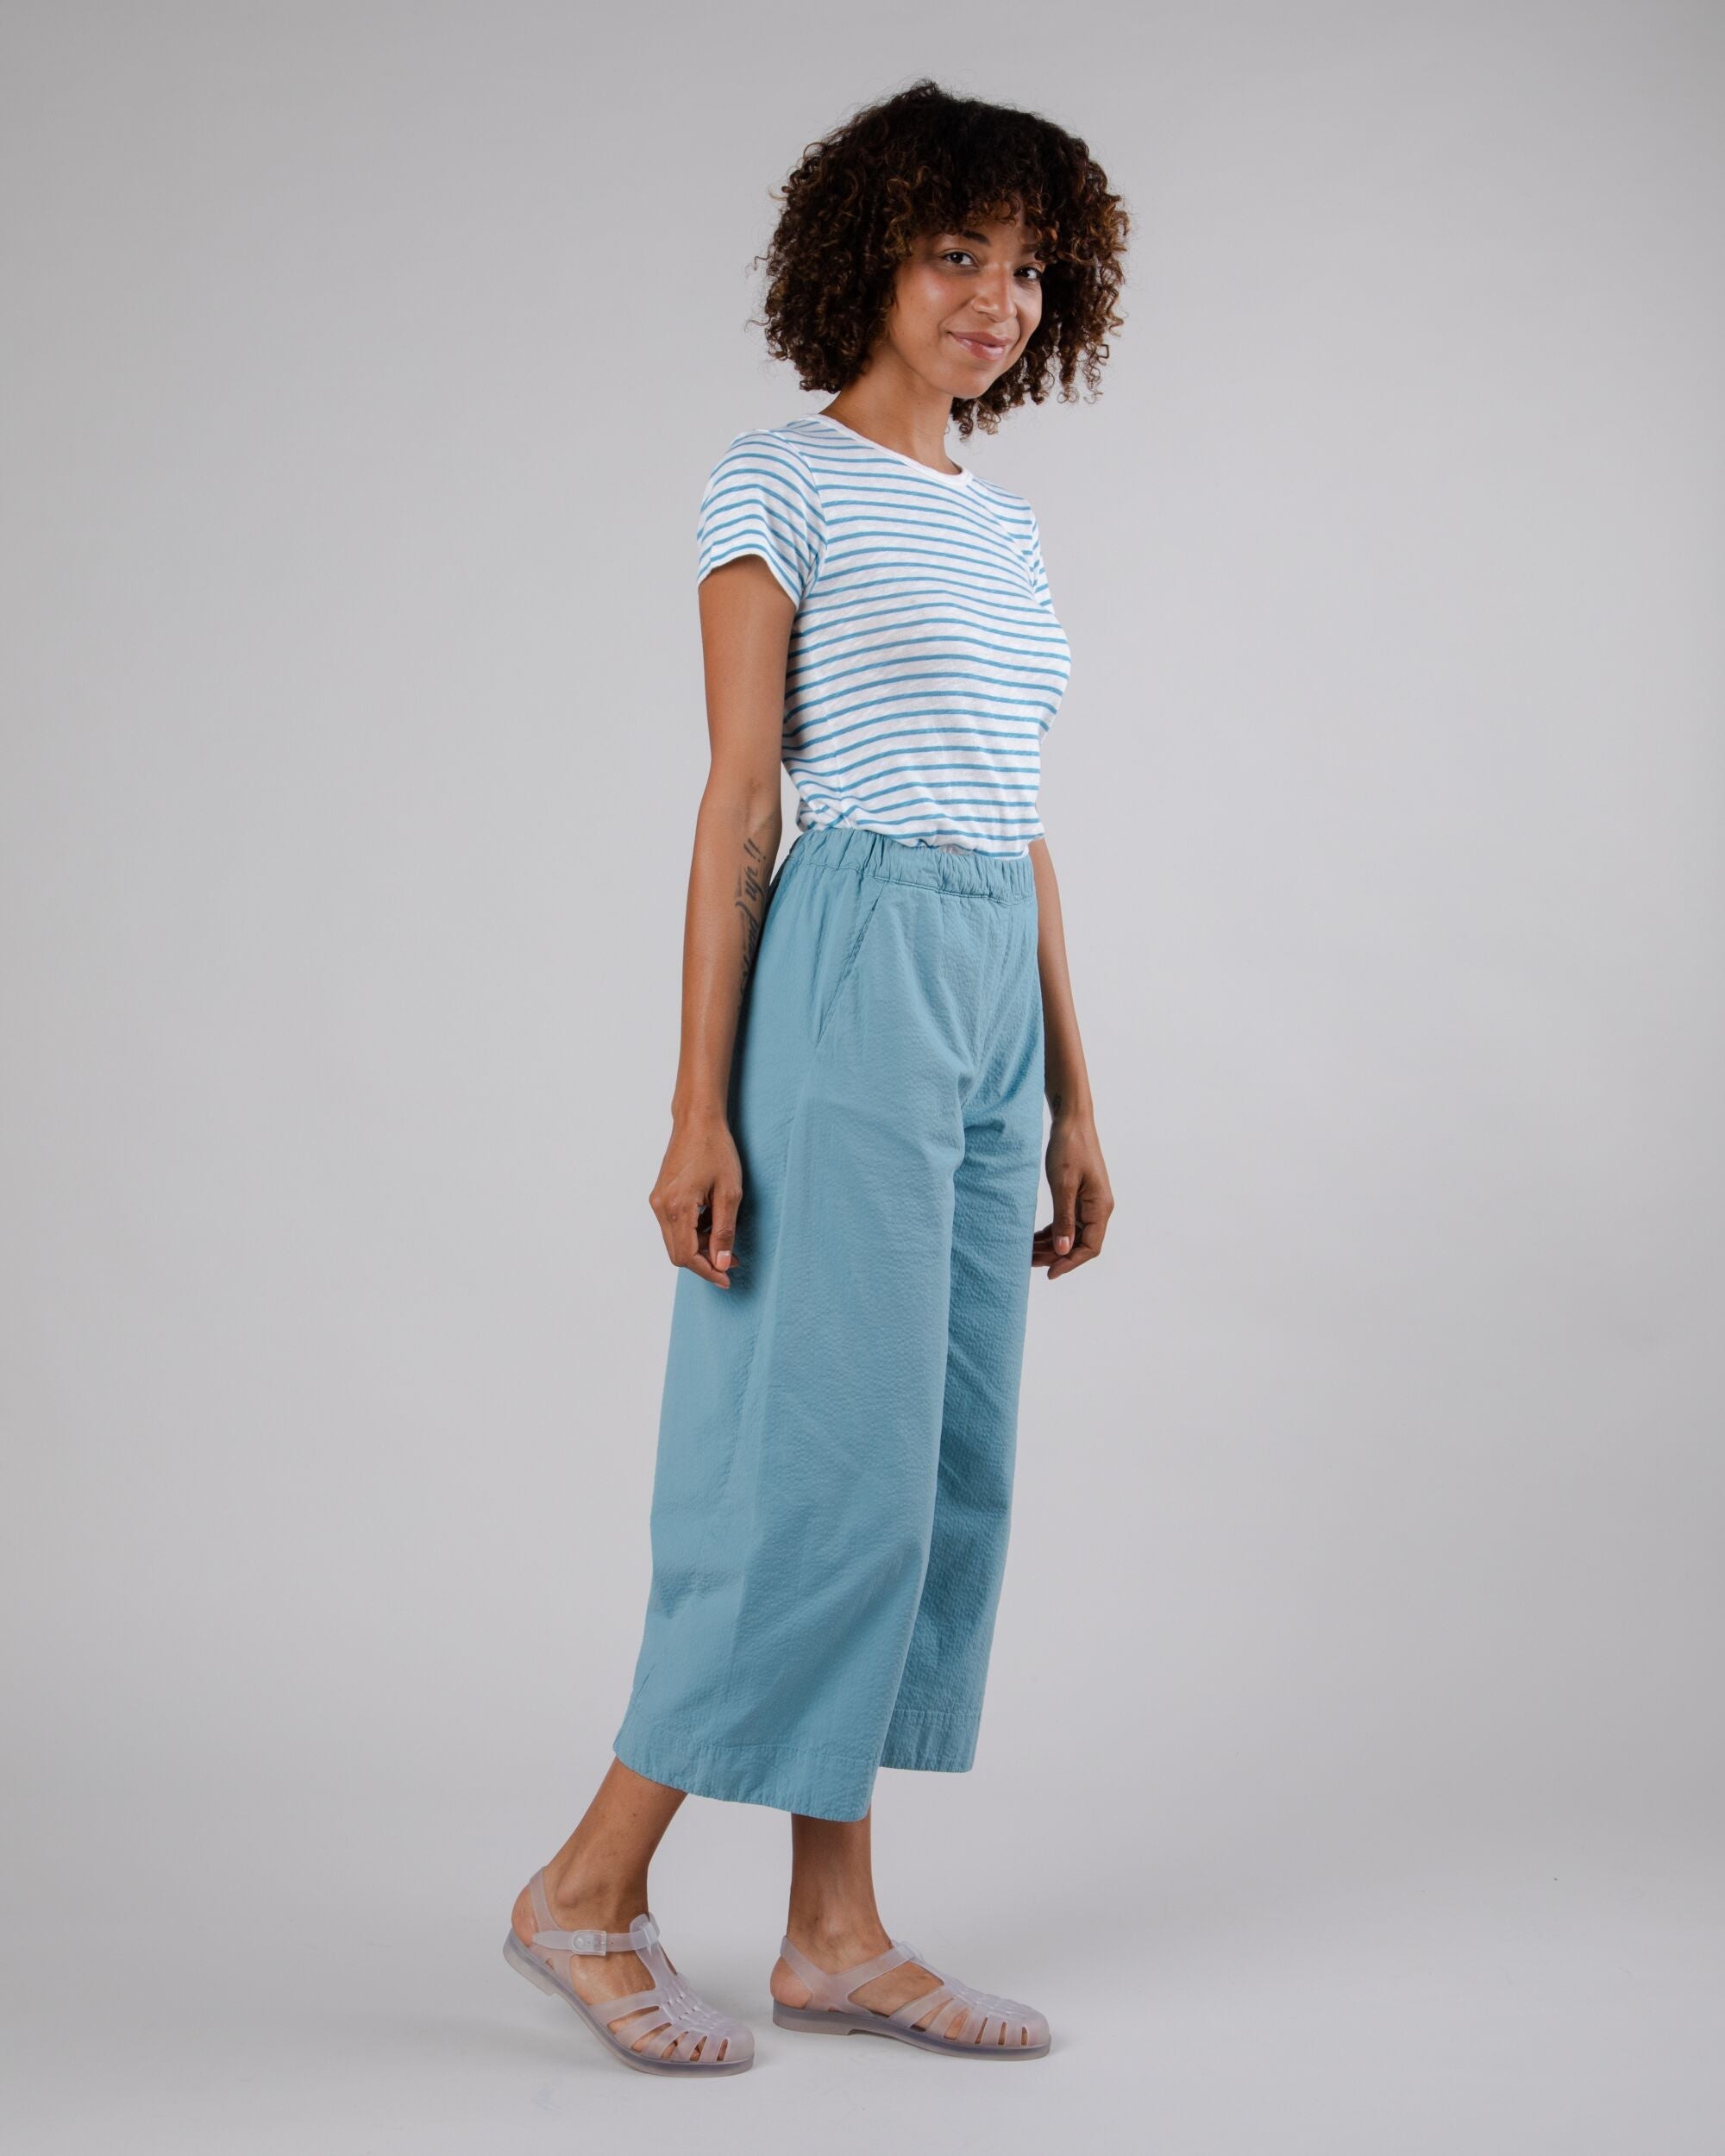 Oversize Picnic trousers in ocean blue made from organic cotton by Brava Fabrics